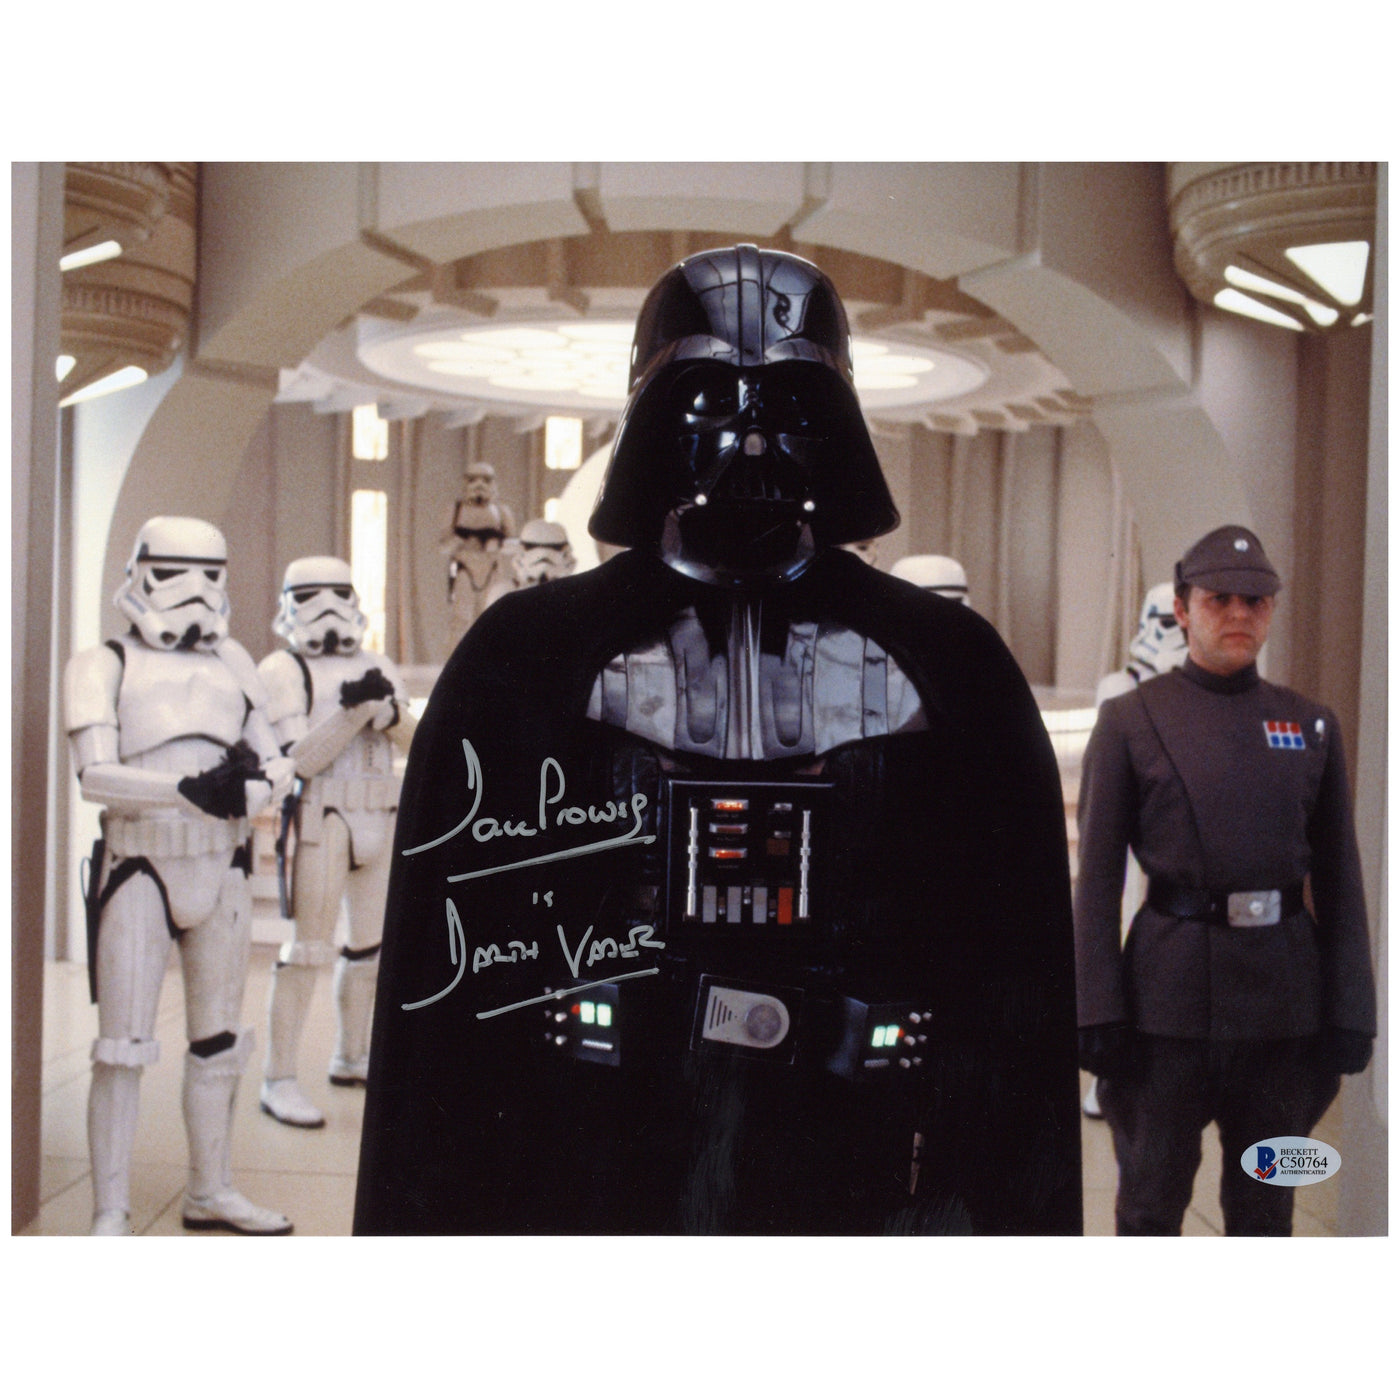 Dave Prowse Signed 11x14 Photo Star Wars Darth Vader Autographed Beckett COA 4